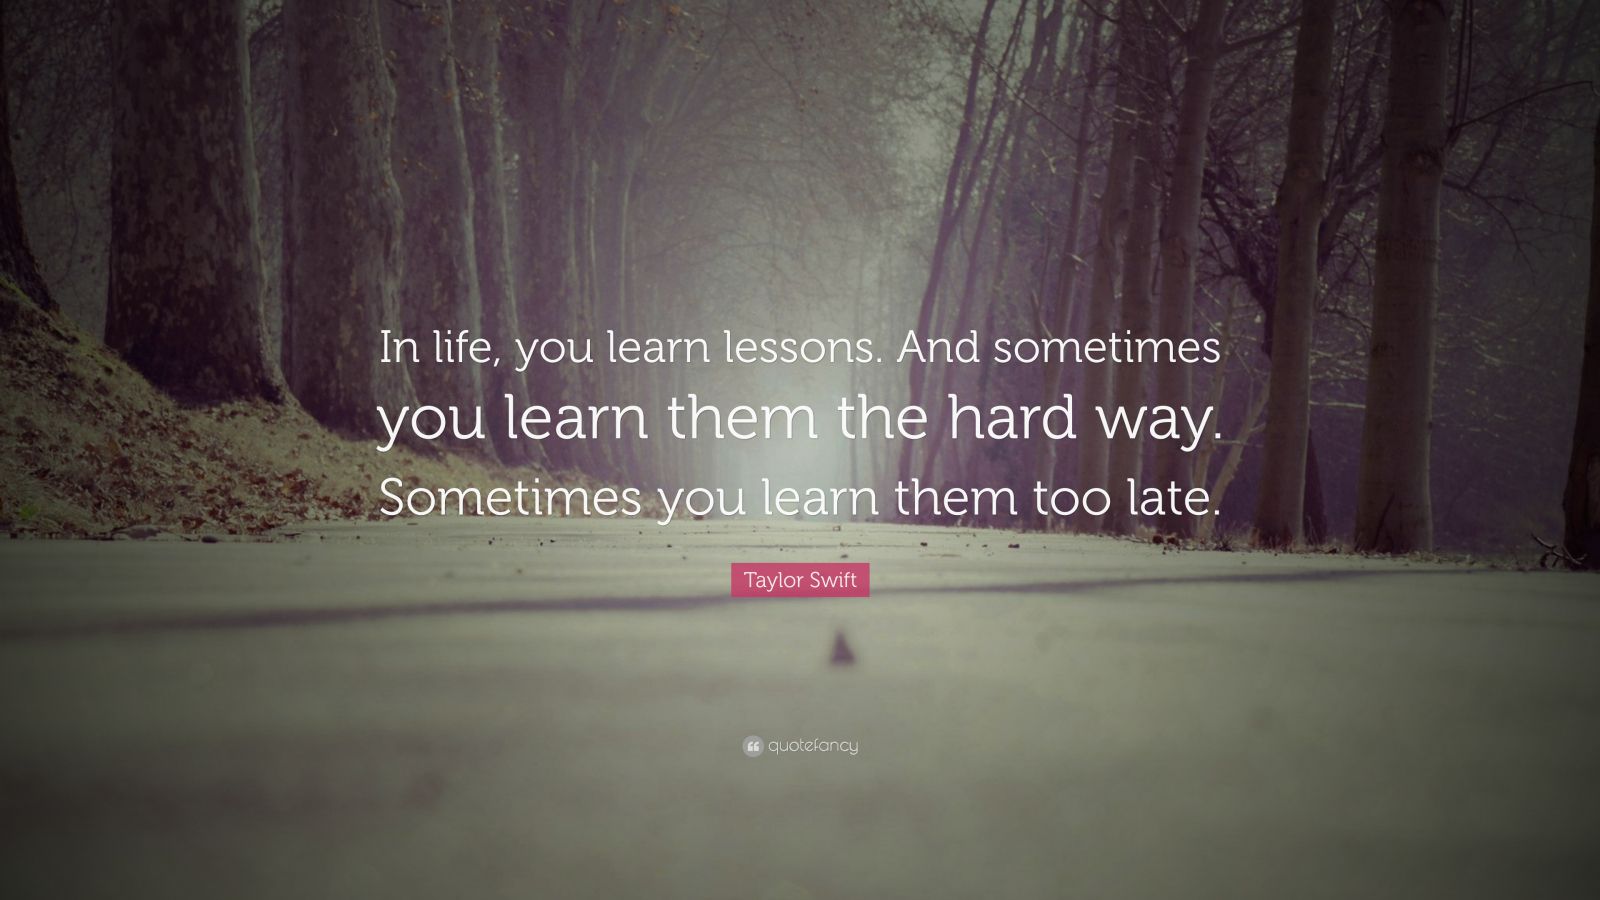 Taylor Swift quote: In life, you learn lessons. And sometimes you